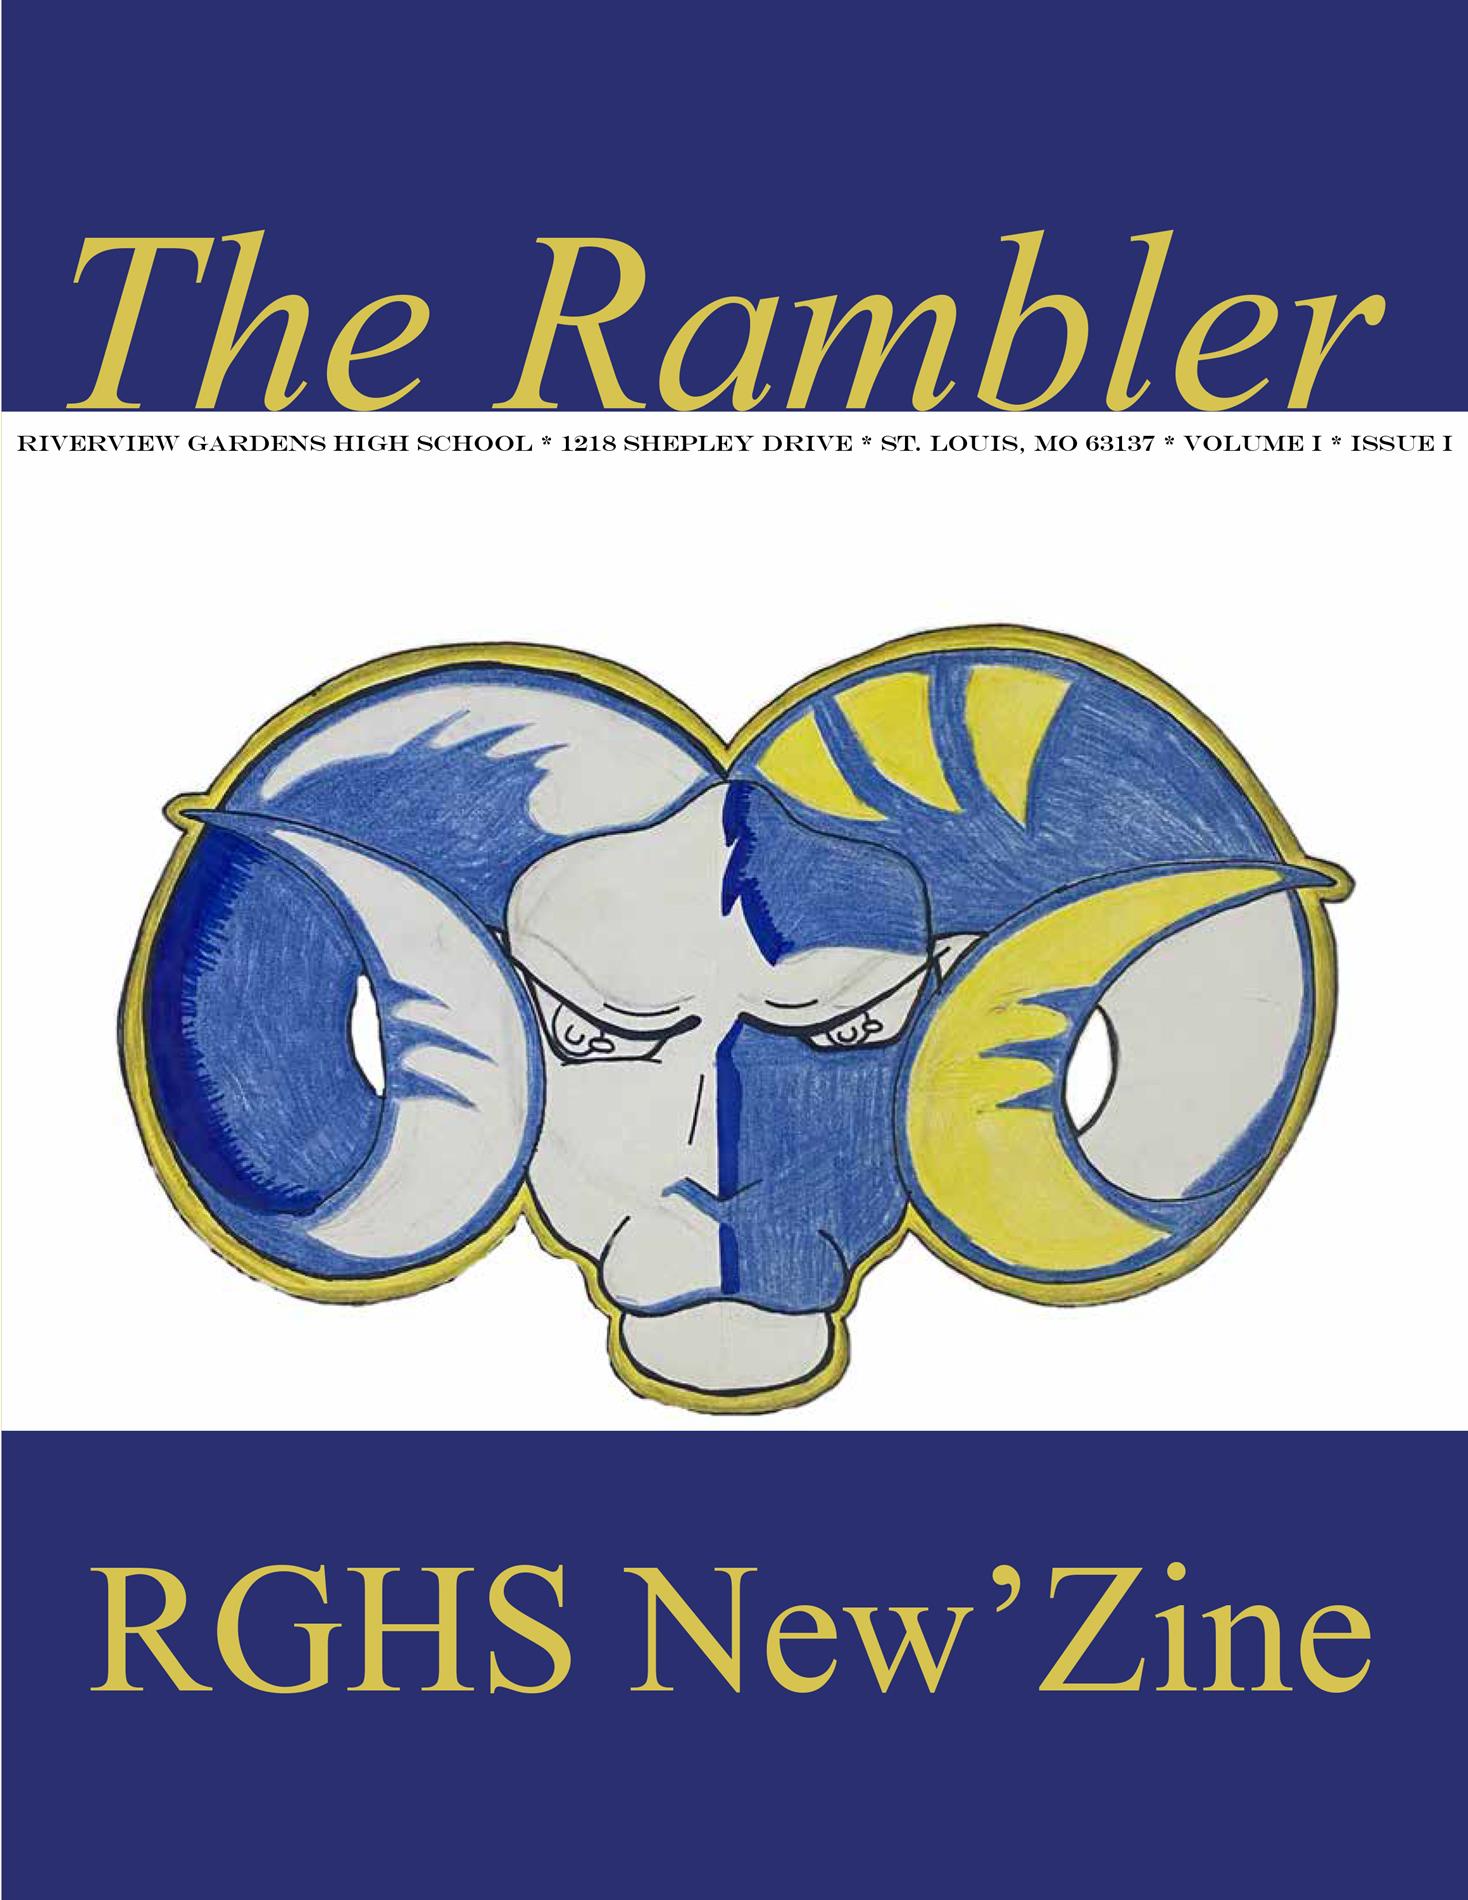 The Rambler - Issue 1